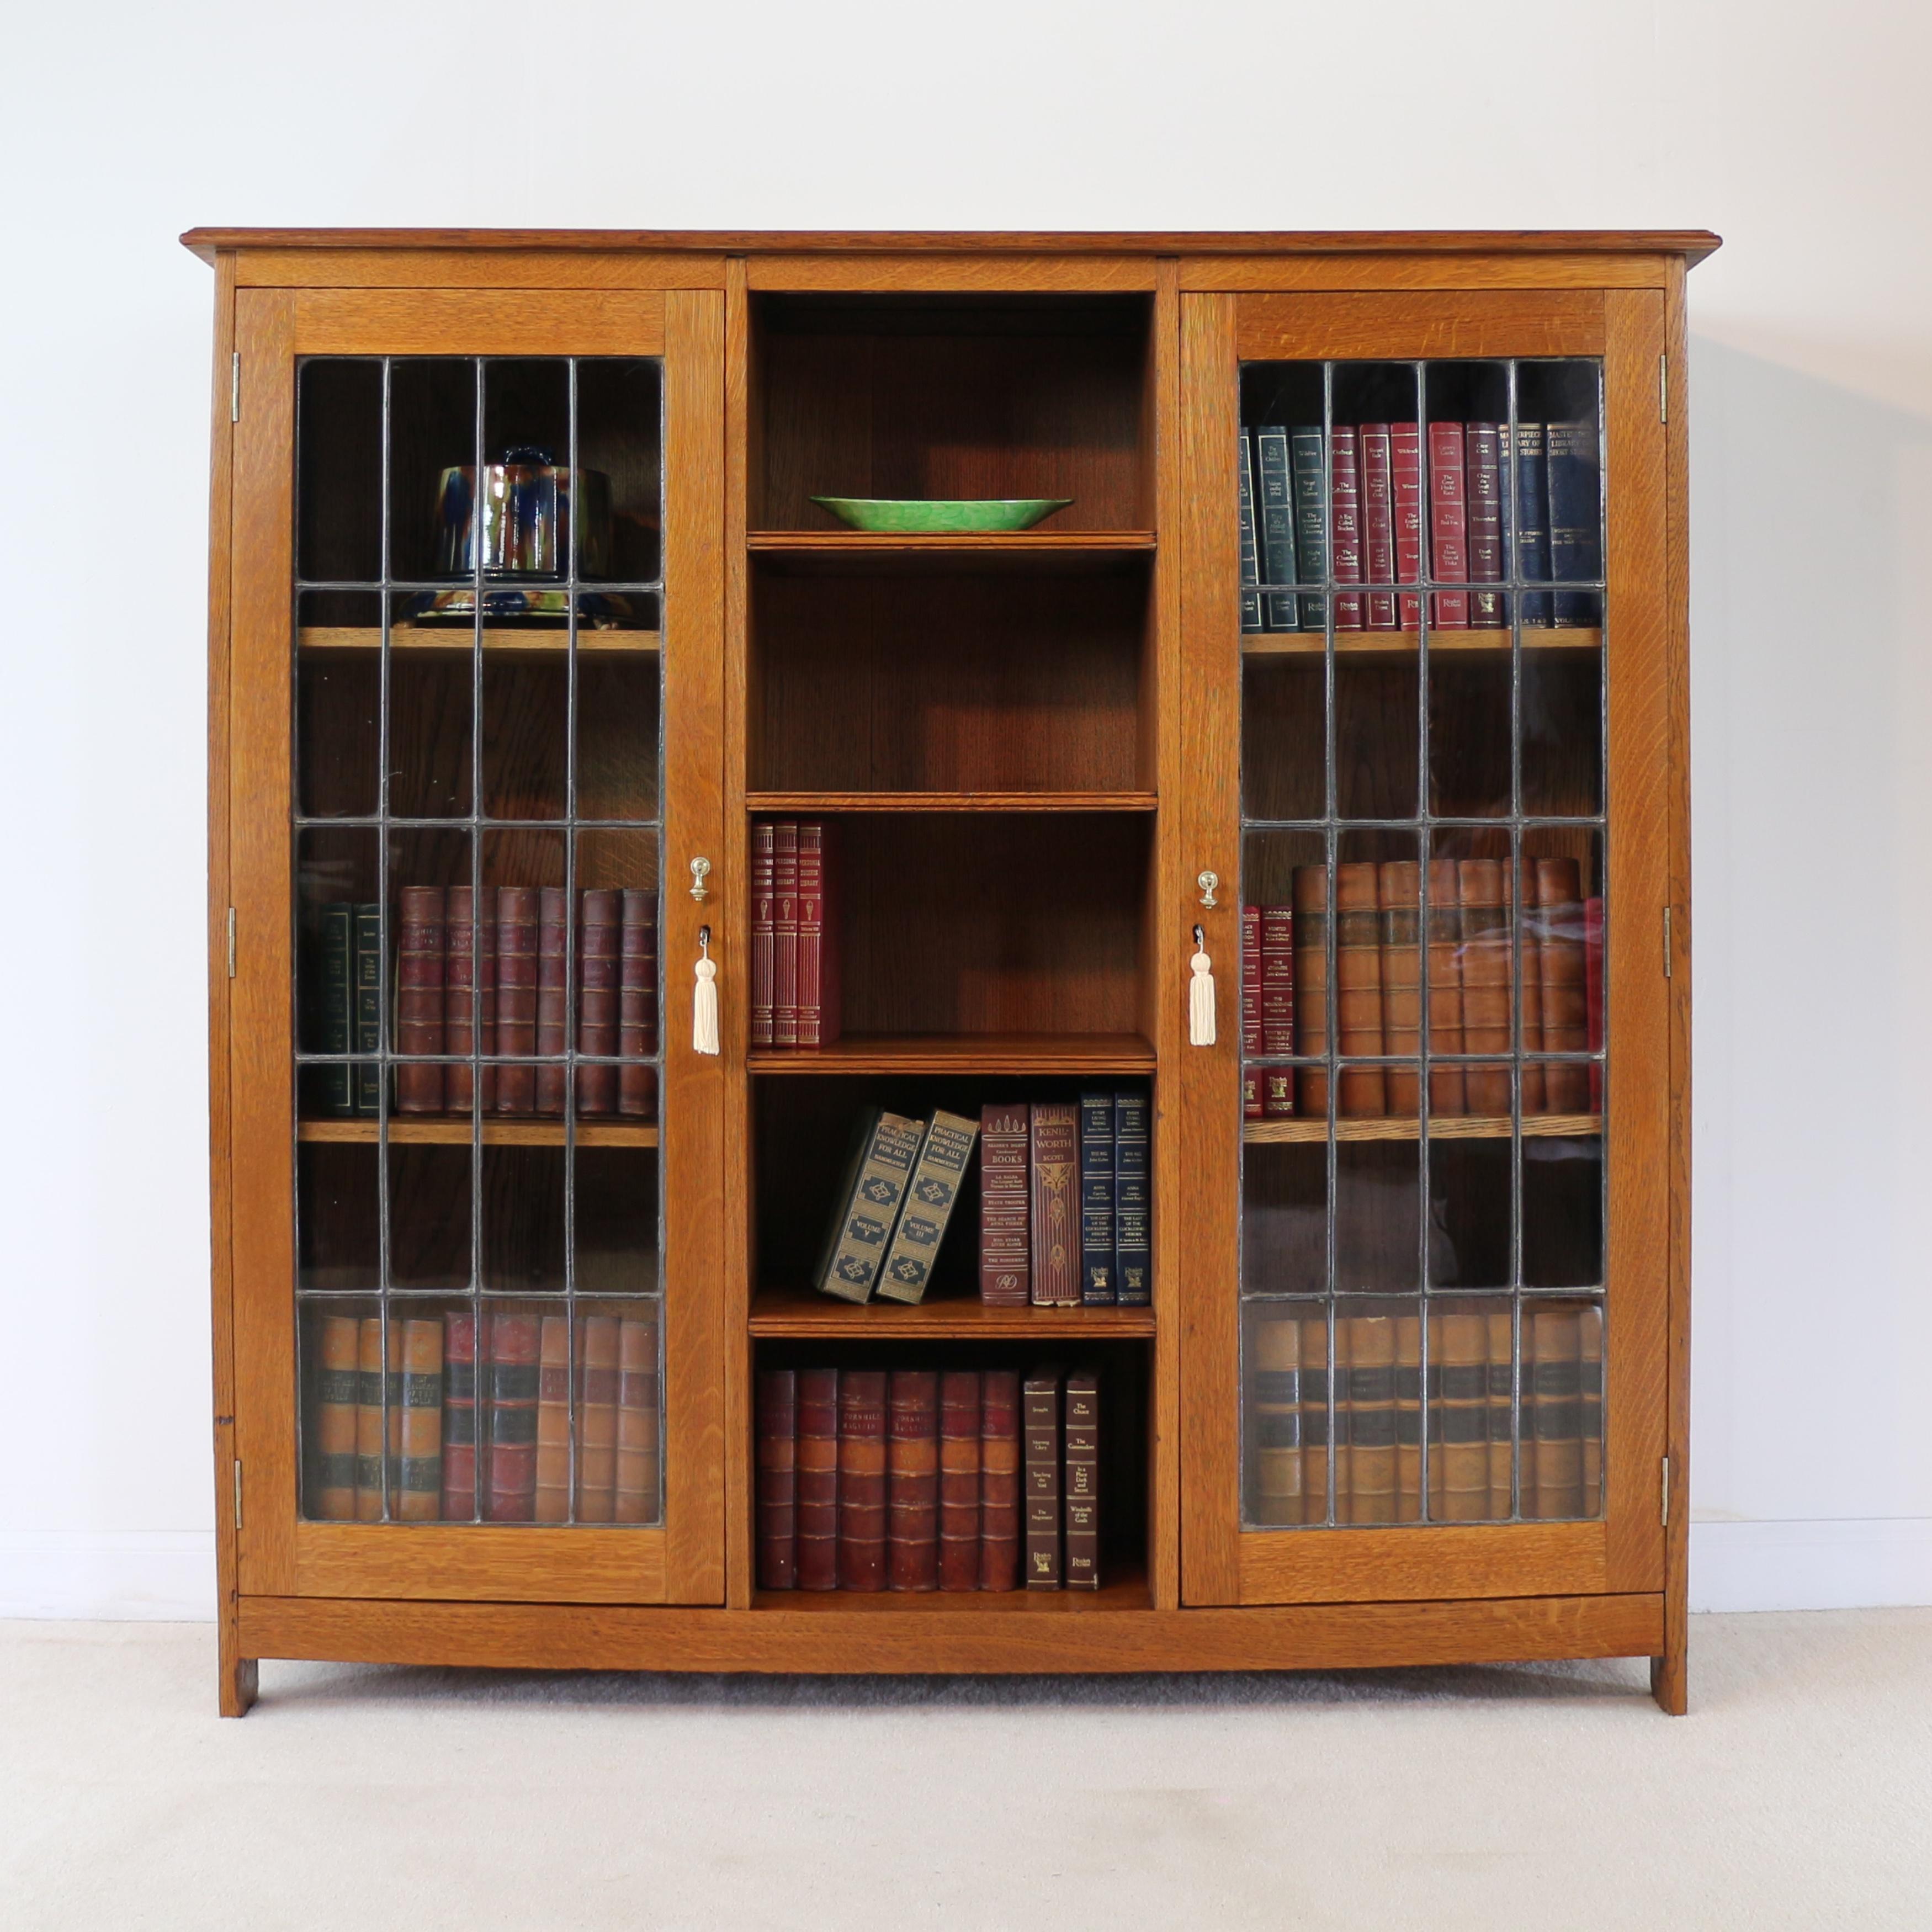 An attractive Arts & Crafts oak bookcase in golden quarter-sawn oak, attributed to Liberty’s of London and dating to circa 1900. Featuring two leaded glass doors each enclosing two adjustable shelves, and open shelves to the centre, with brass drop